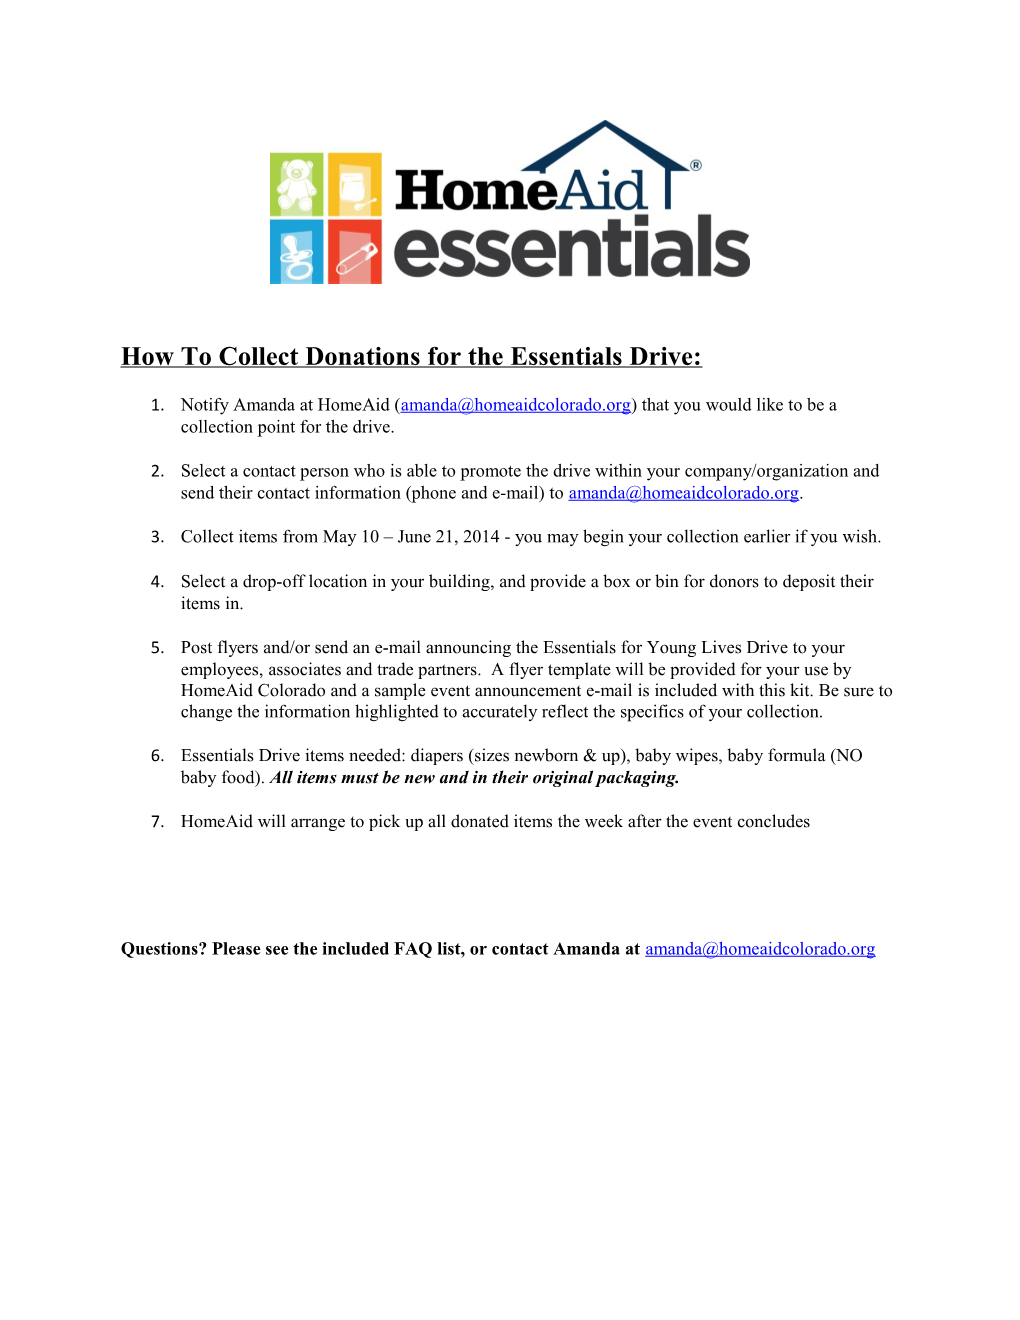 How to Collect Donations for the Essentials Drive